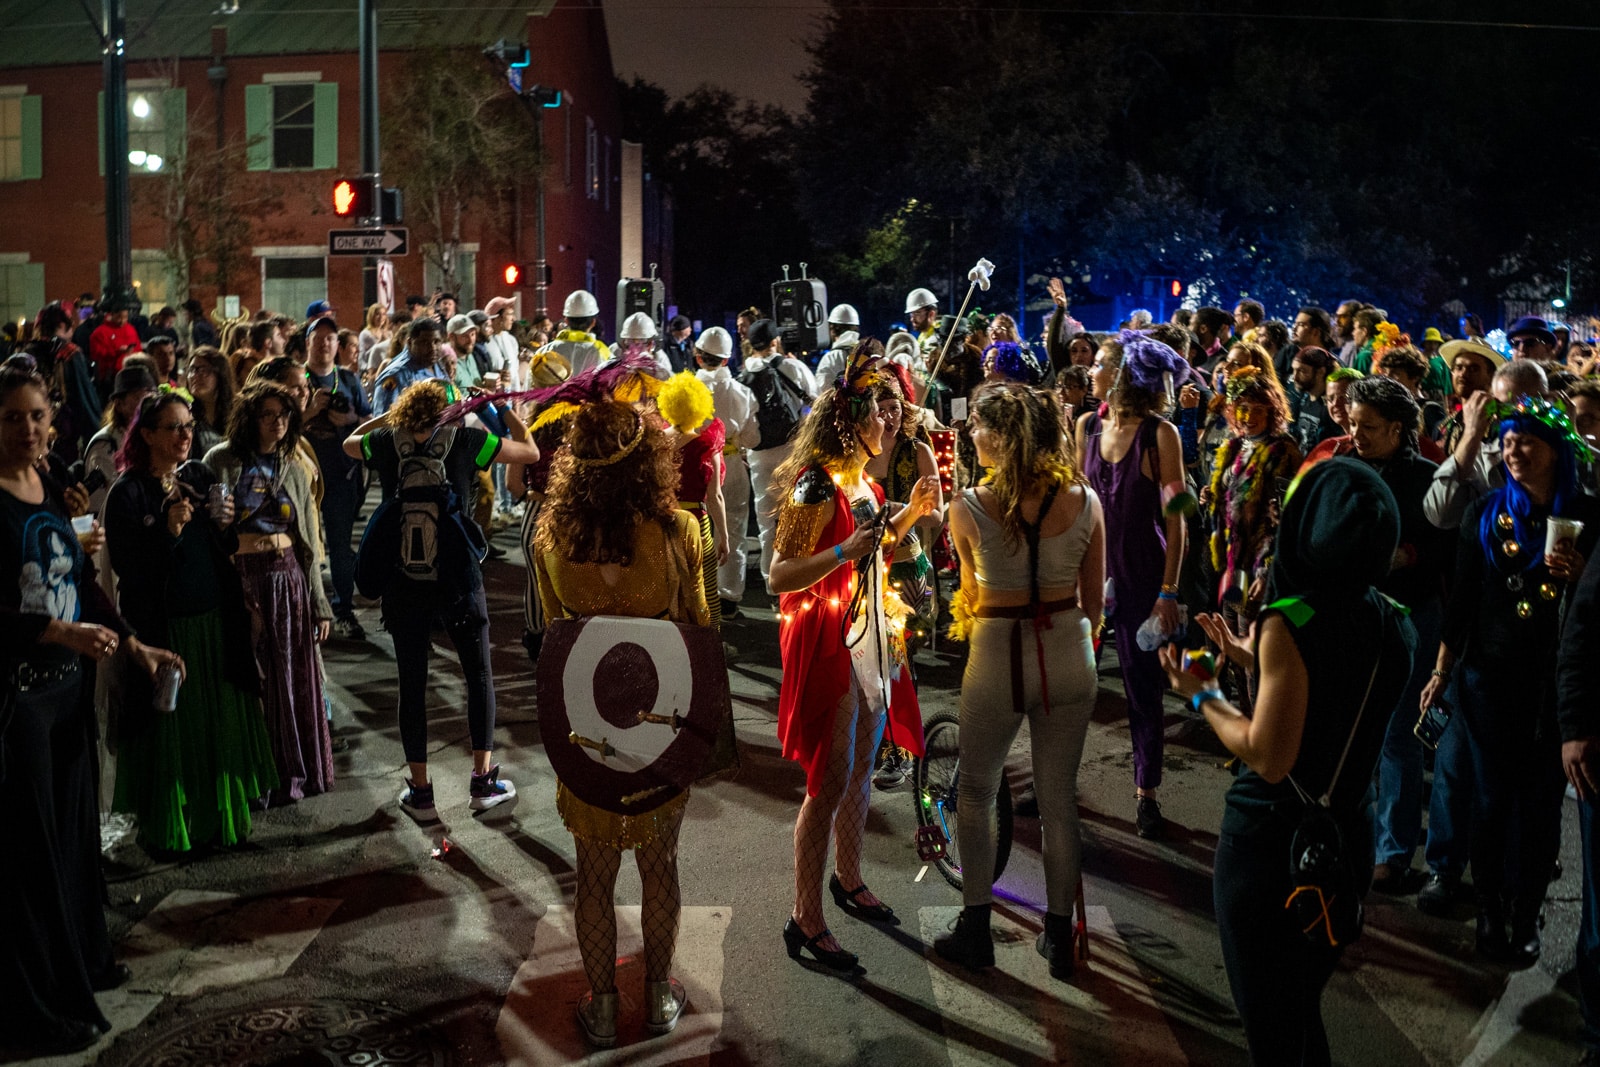 End of the Mardi Gras parade line in New Orleans